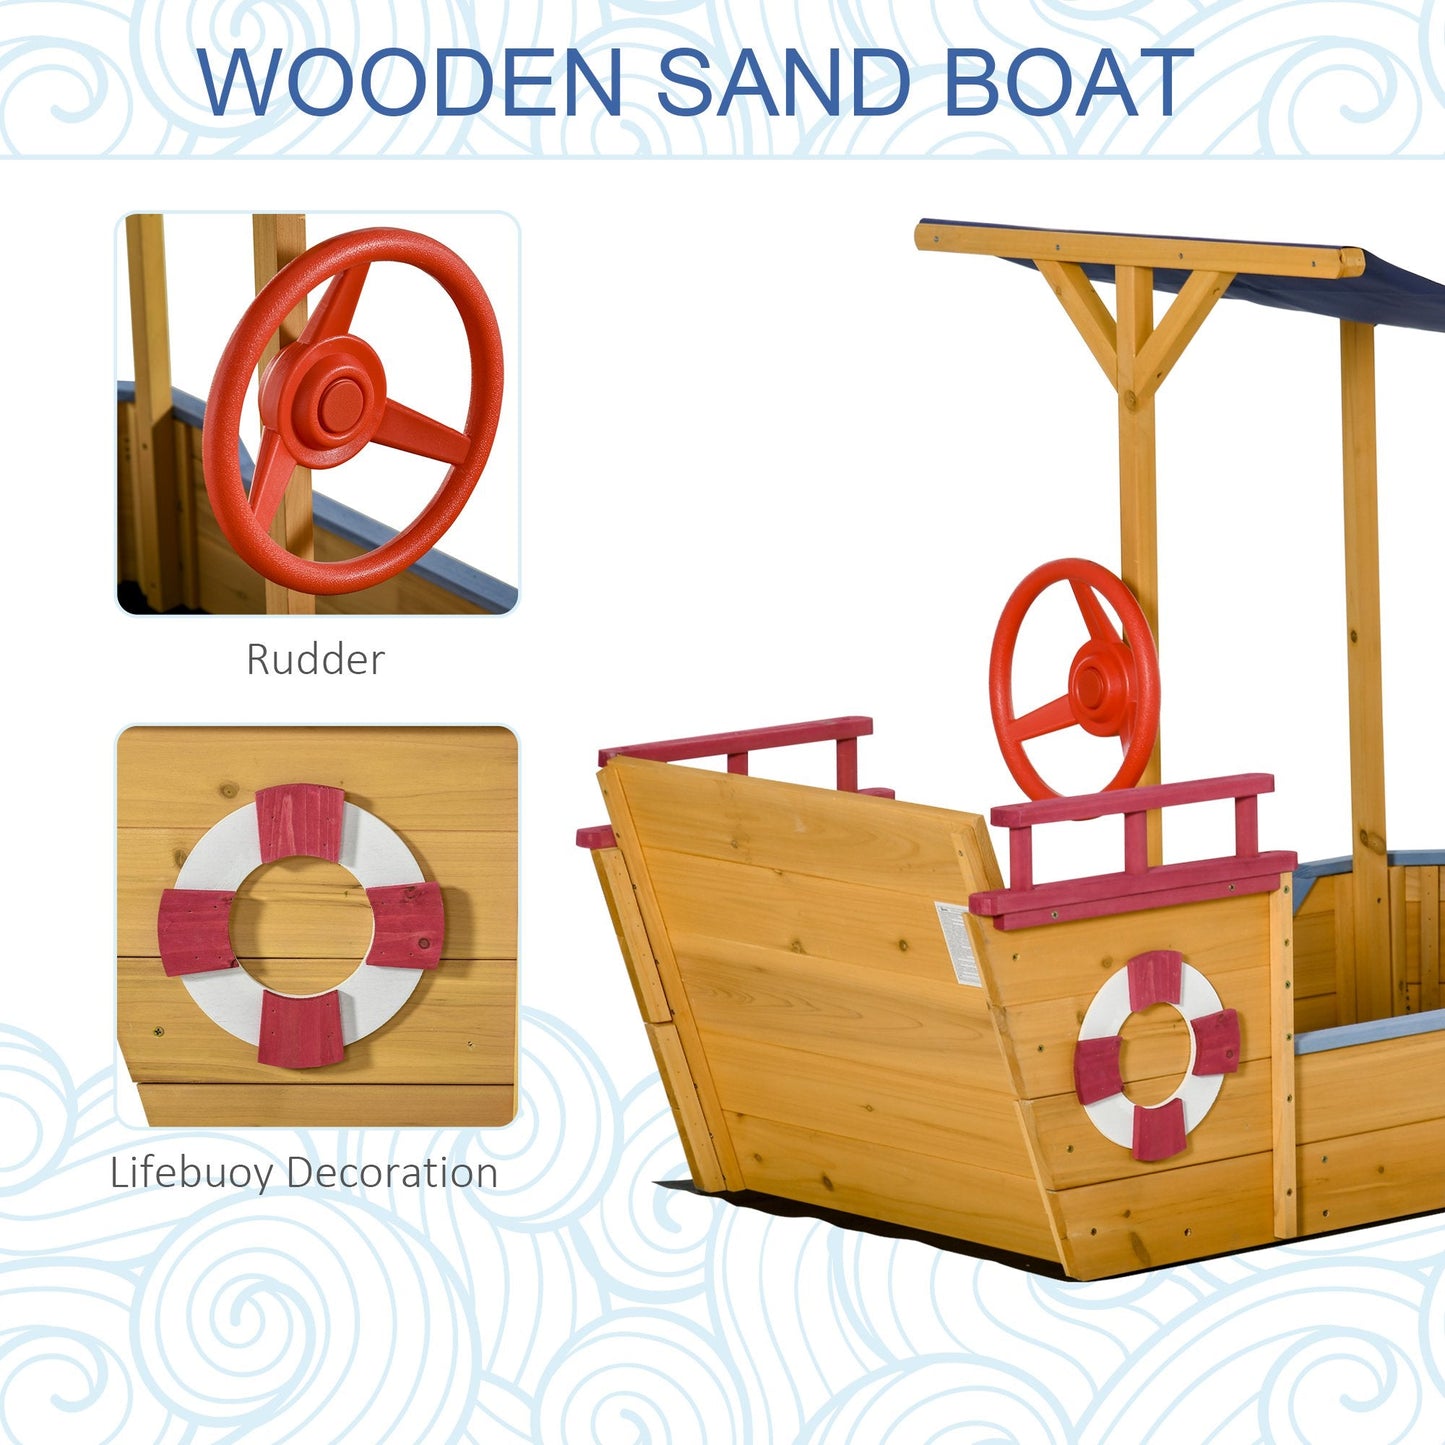 Toys and Games-Pirate Ship Wooden Sandbox Covered Children Sand boat Outdoor, with Storage Bench, Sun Protective Canopy Cover, Ages 3-8 Years Old, Orange - Outdoor Style Company